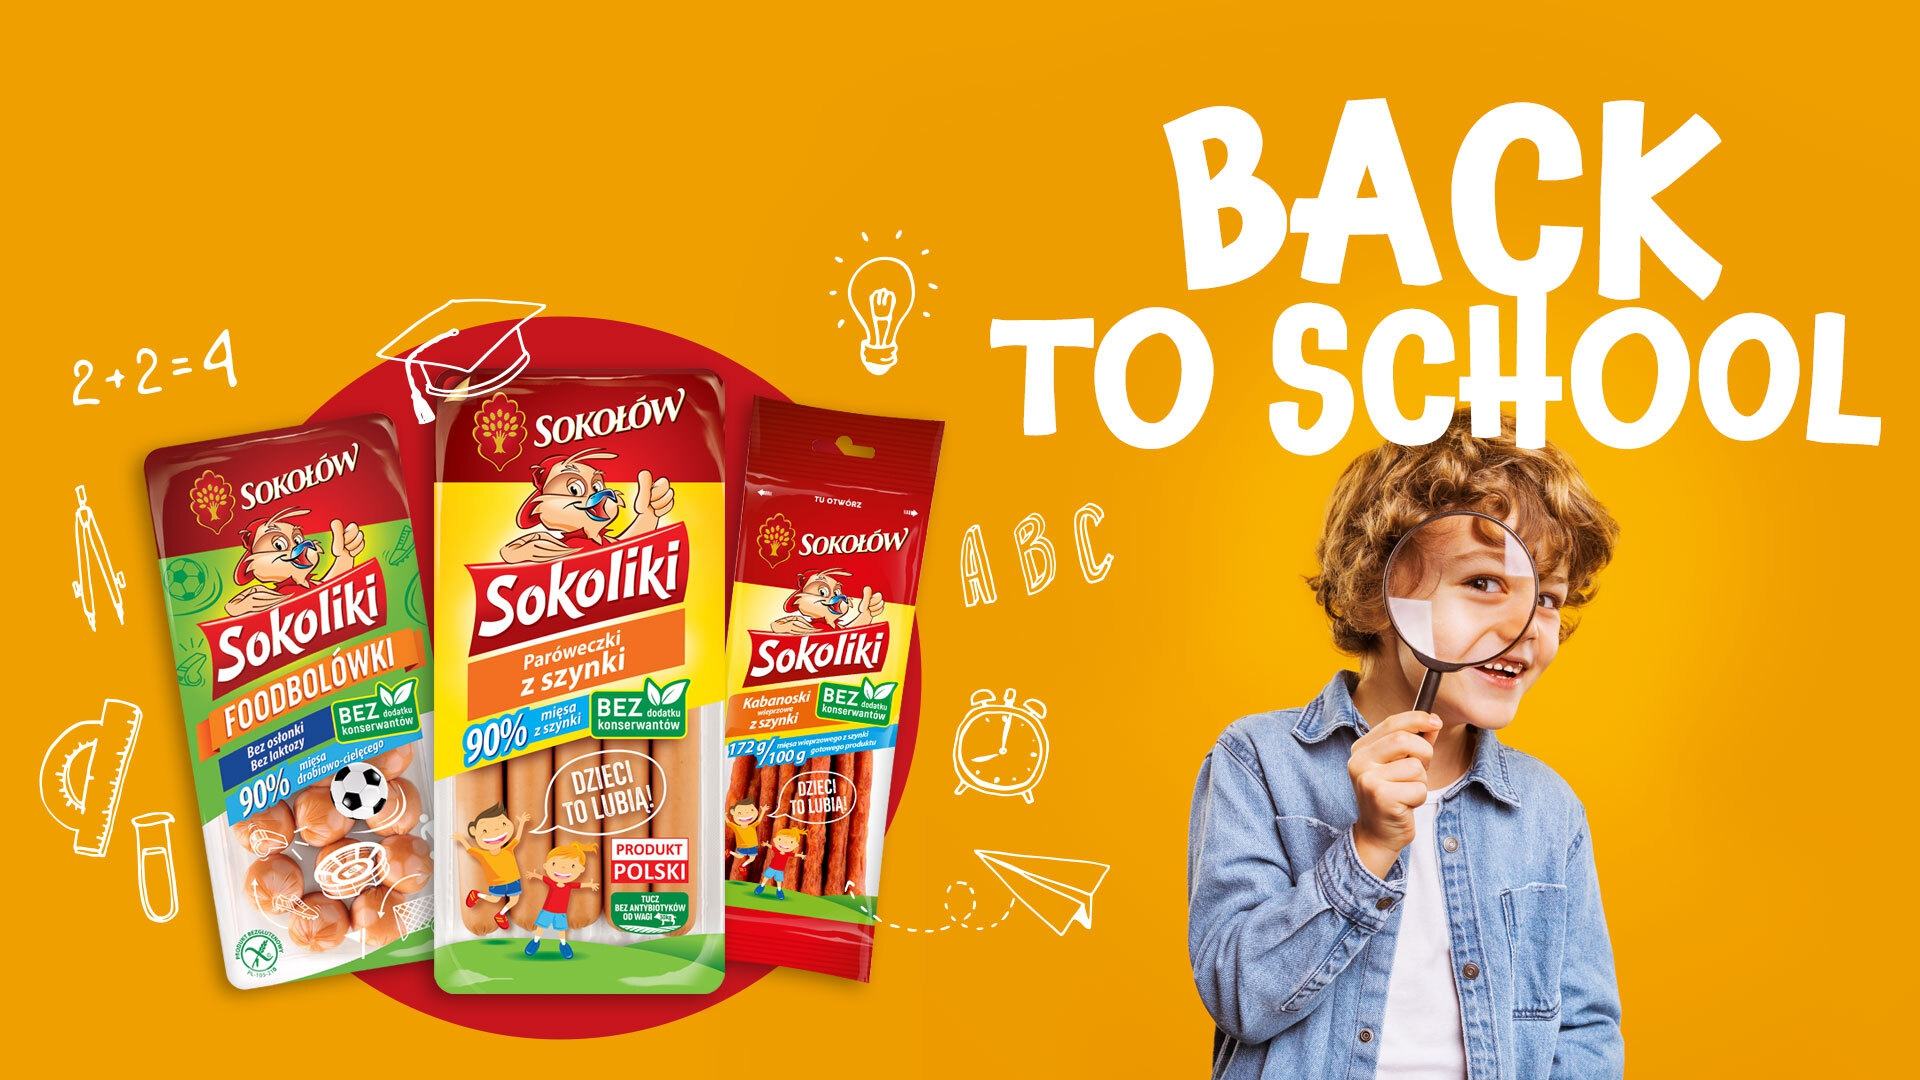 Back to school with taste